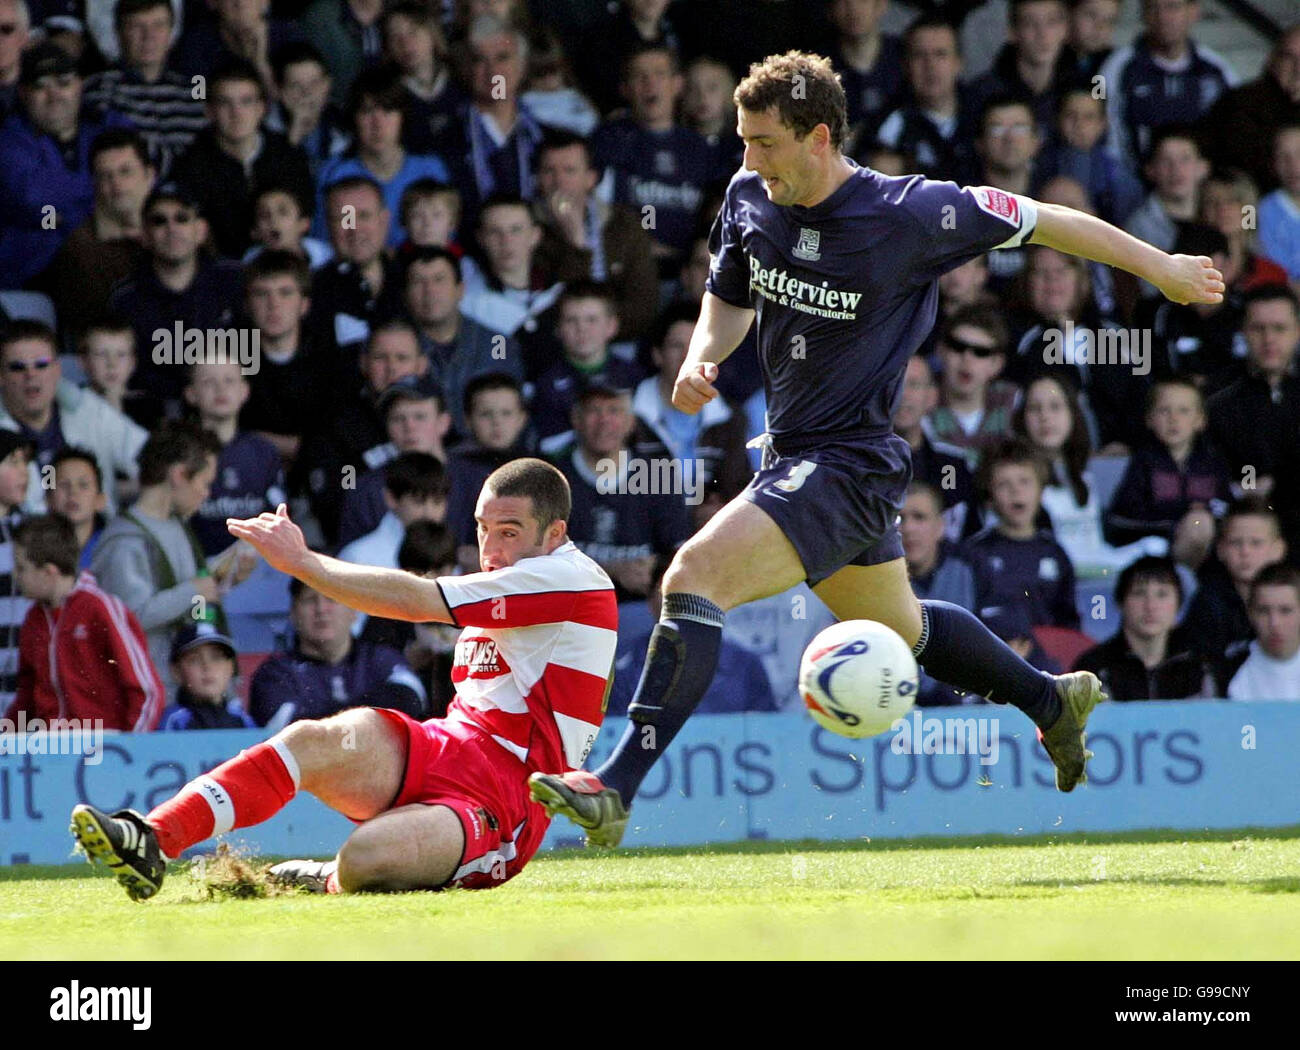 SOCCER Southend. Southend United's Che Wilson (R) in action against Doncaster's Simon Marples during the League One match at Roots Hall, Southend-On-Sea. Stock Photo